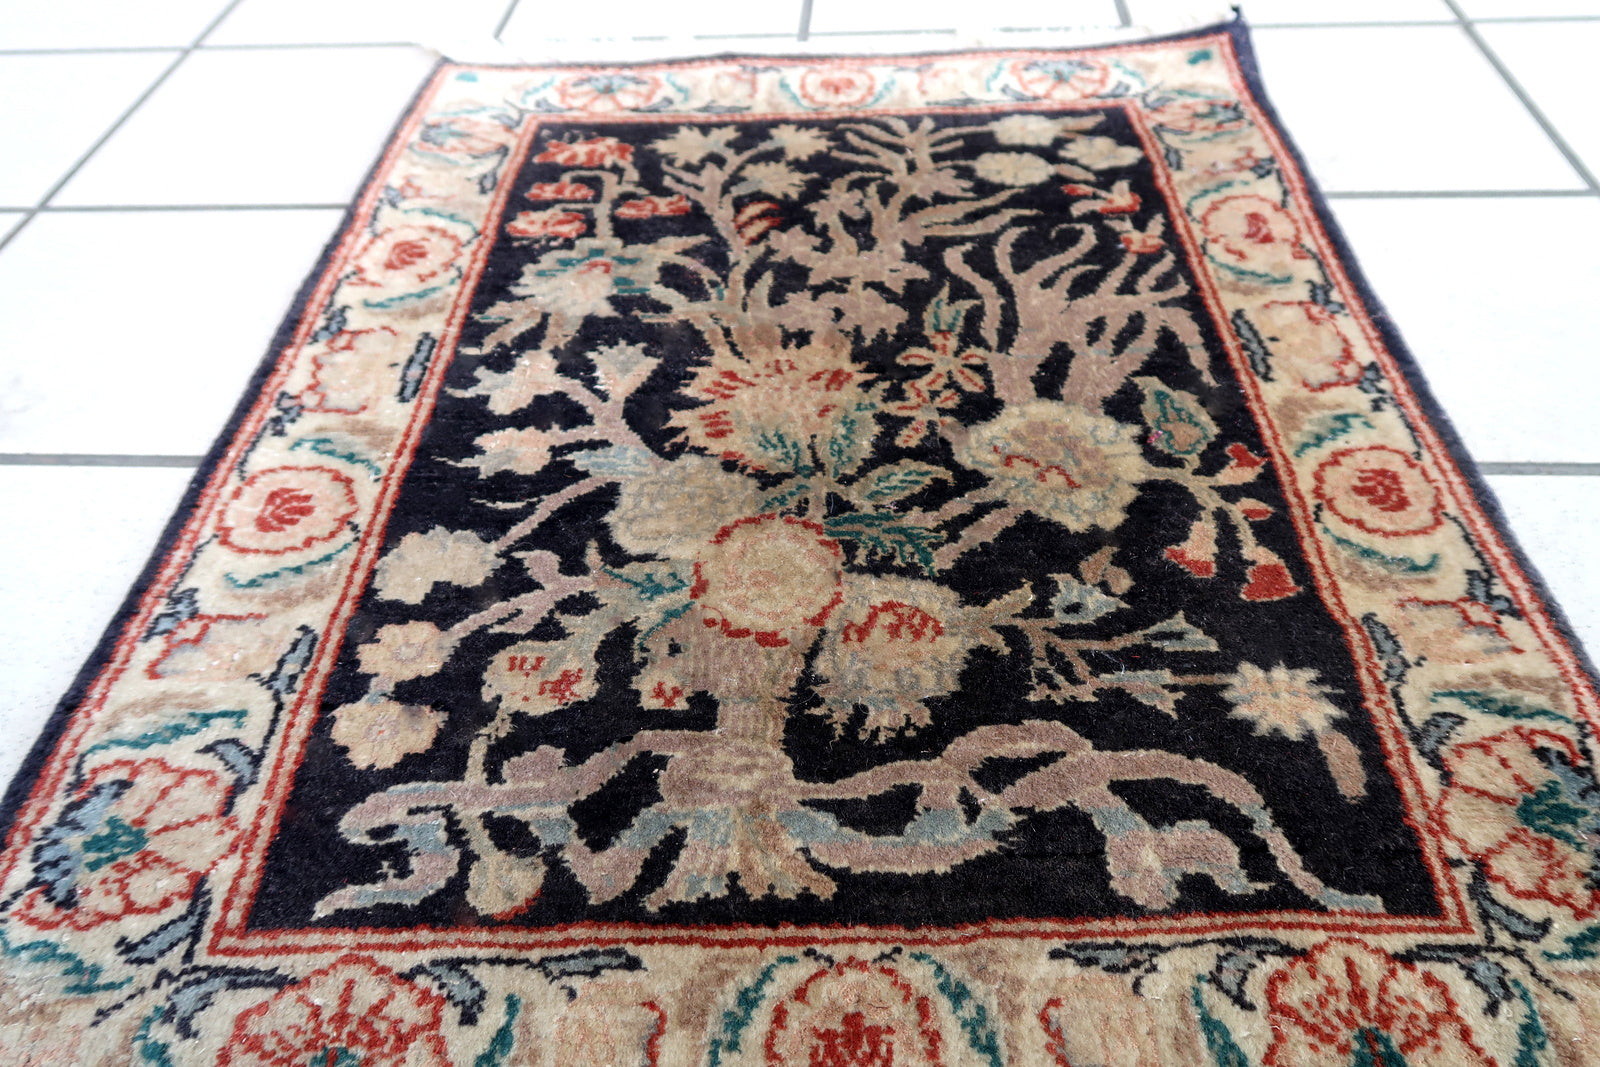 Handmade vintage Persian Tabriz rug in black color and garden design. The rug is from the end of 20th century in original good condition.